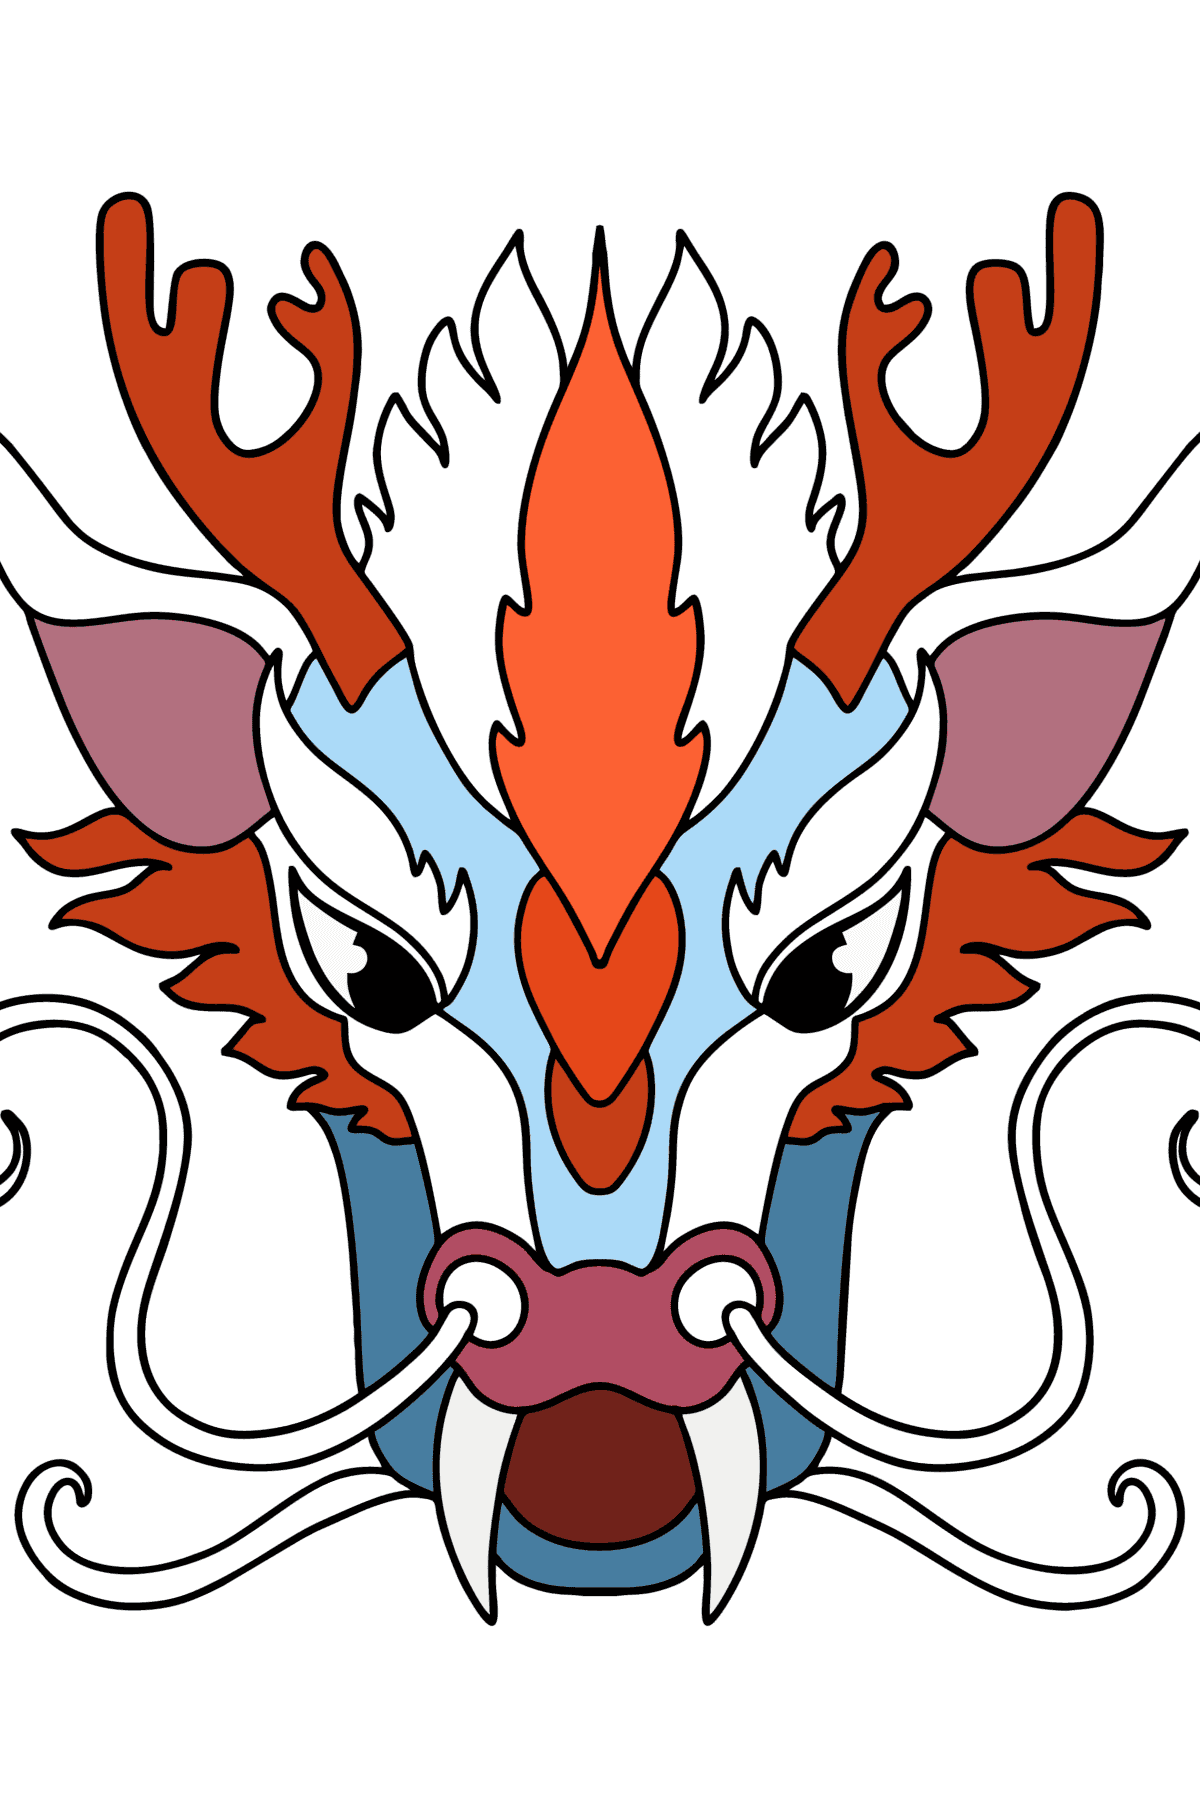 Dragon head coloring page - Coloring Pages for Kids